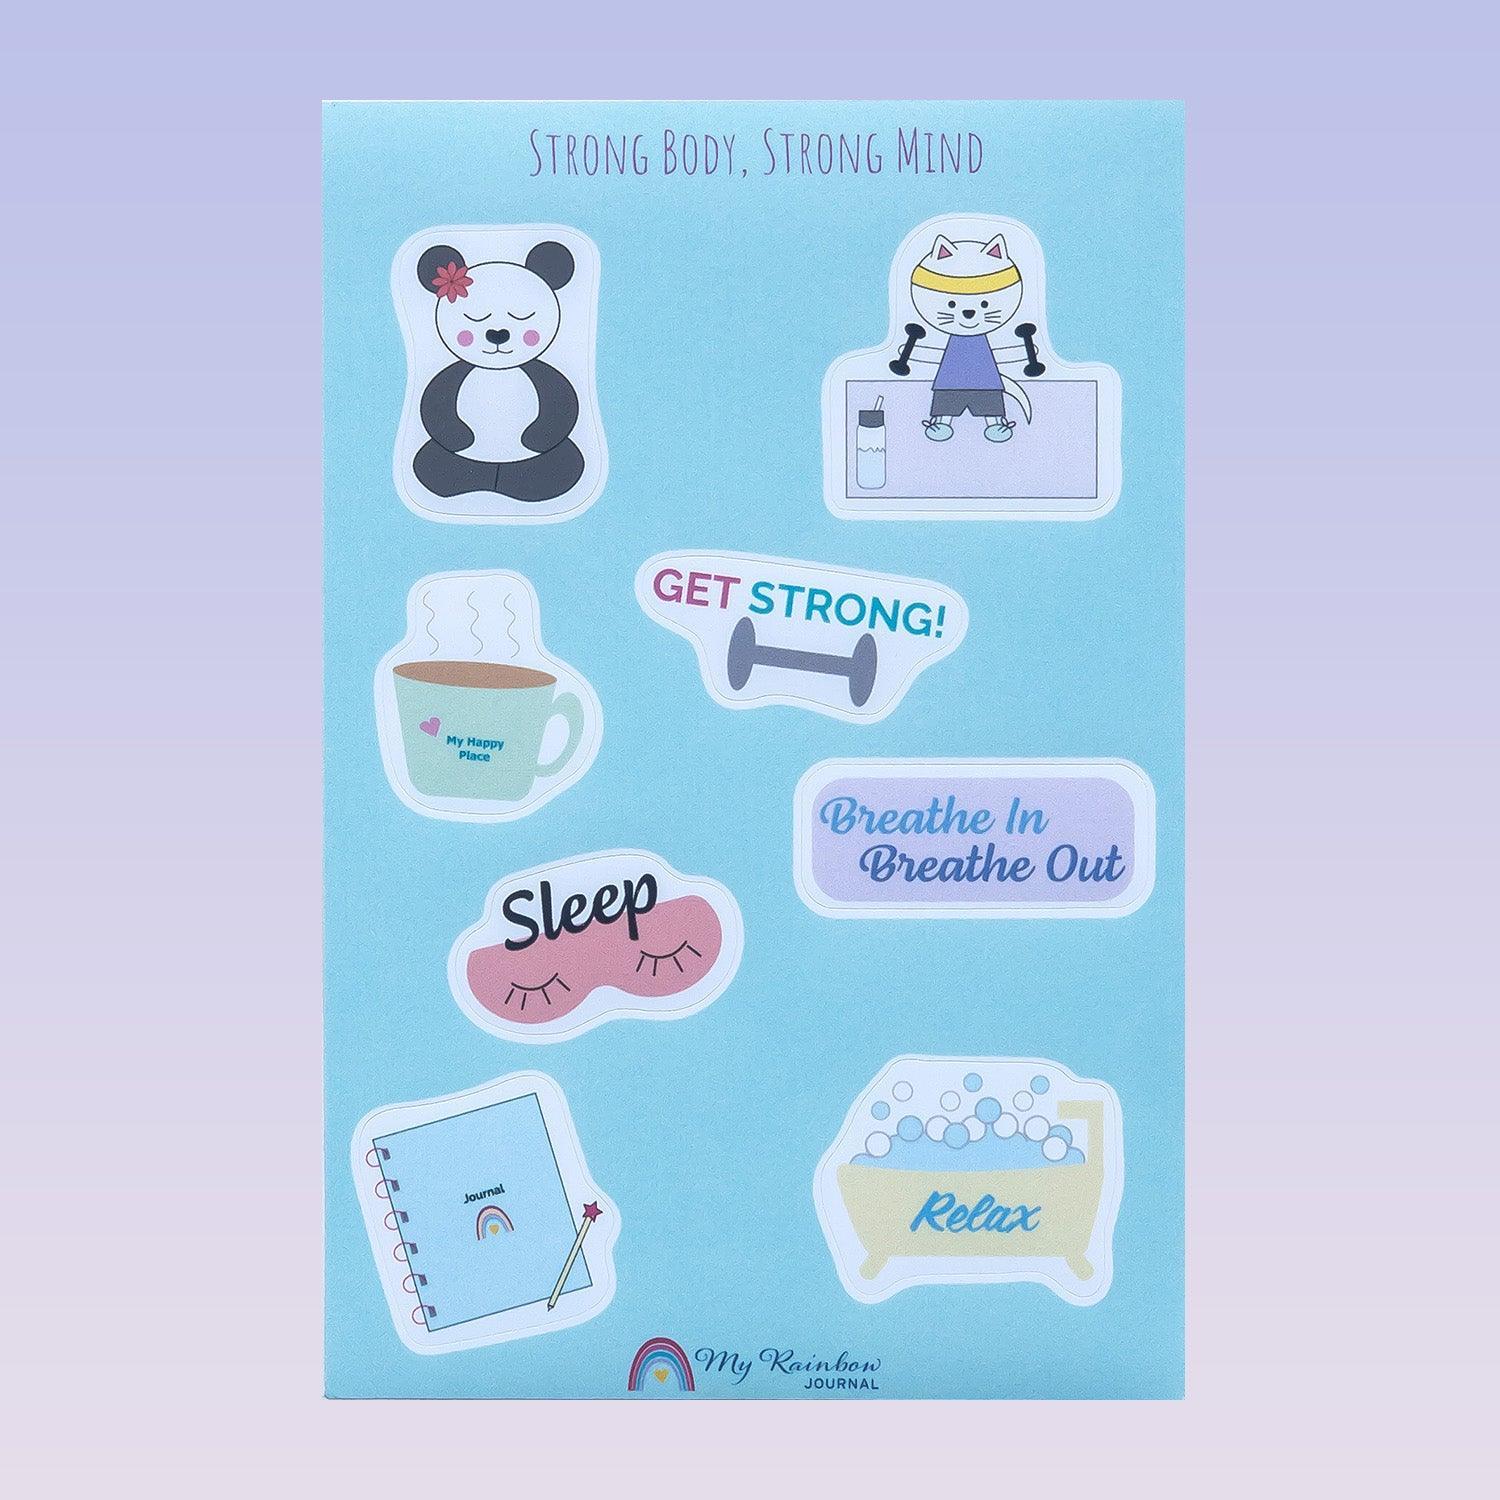 Strong Body, Strong Mind Sticker Sheet features stickers that emphasize the importance of self-care and taking time for your body and mind.